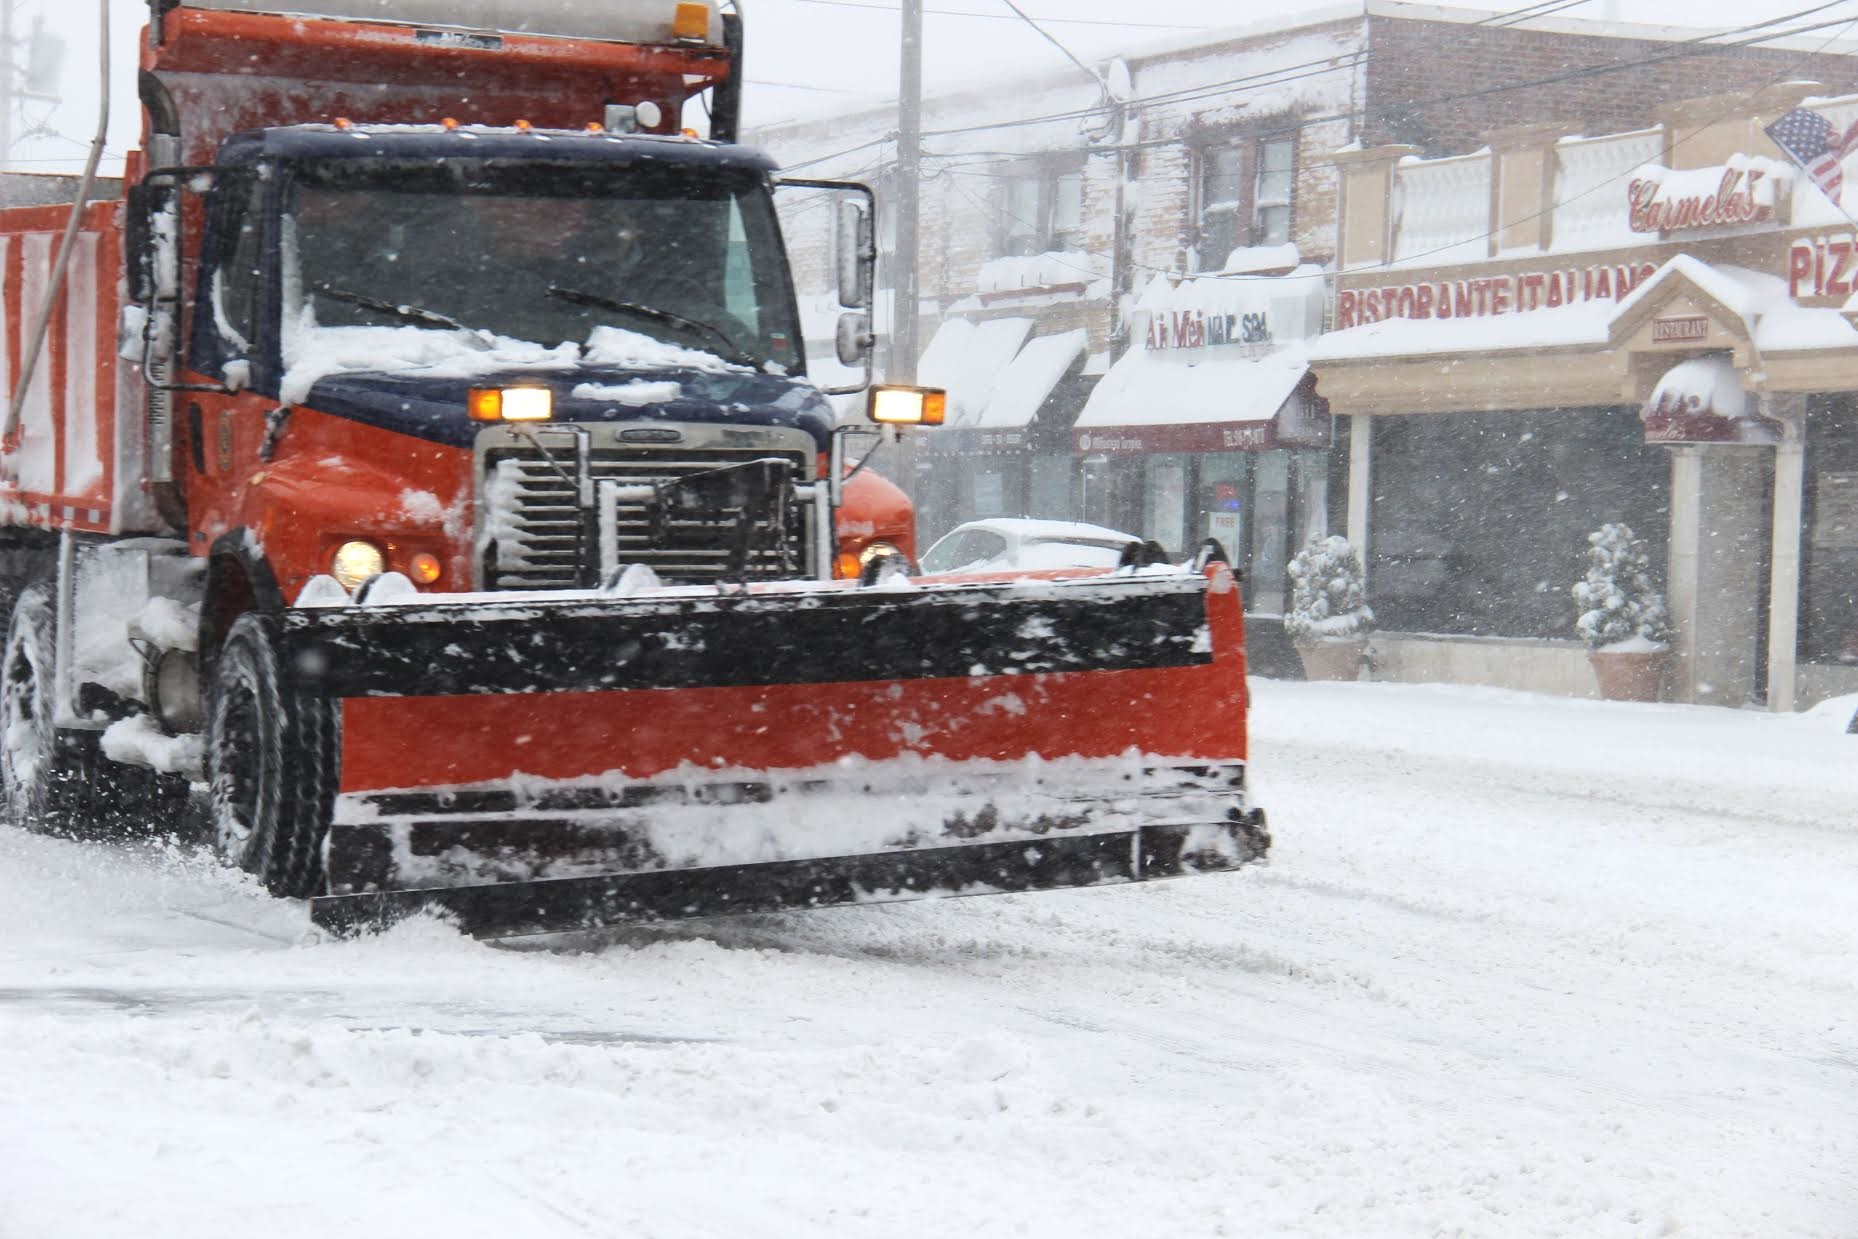 Plows from both Nassau County and the Town of Hempstead have been out clearing roads in Franklin Square and Elmont.